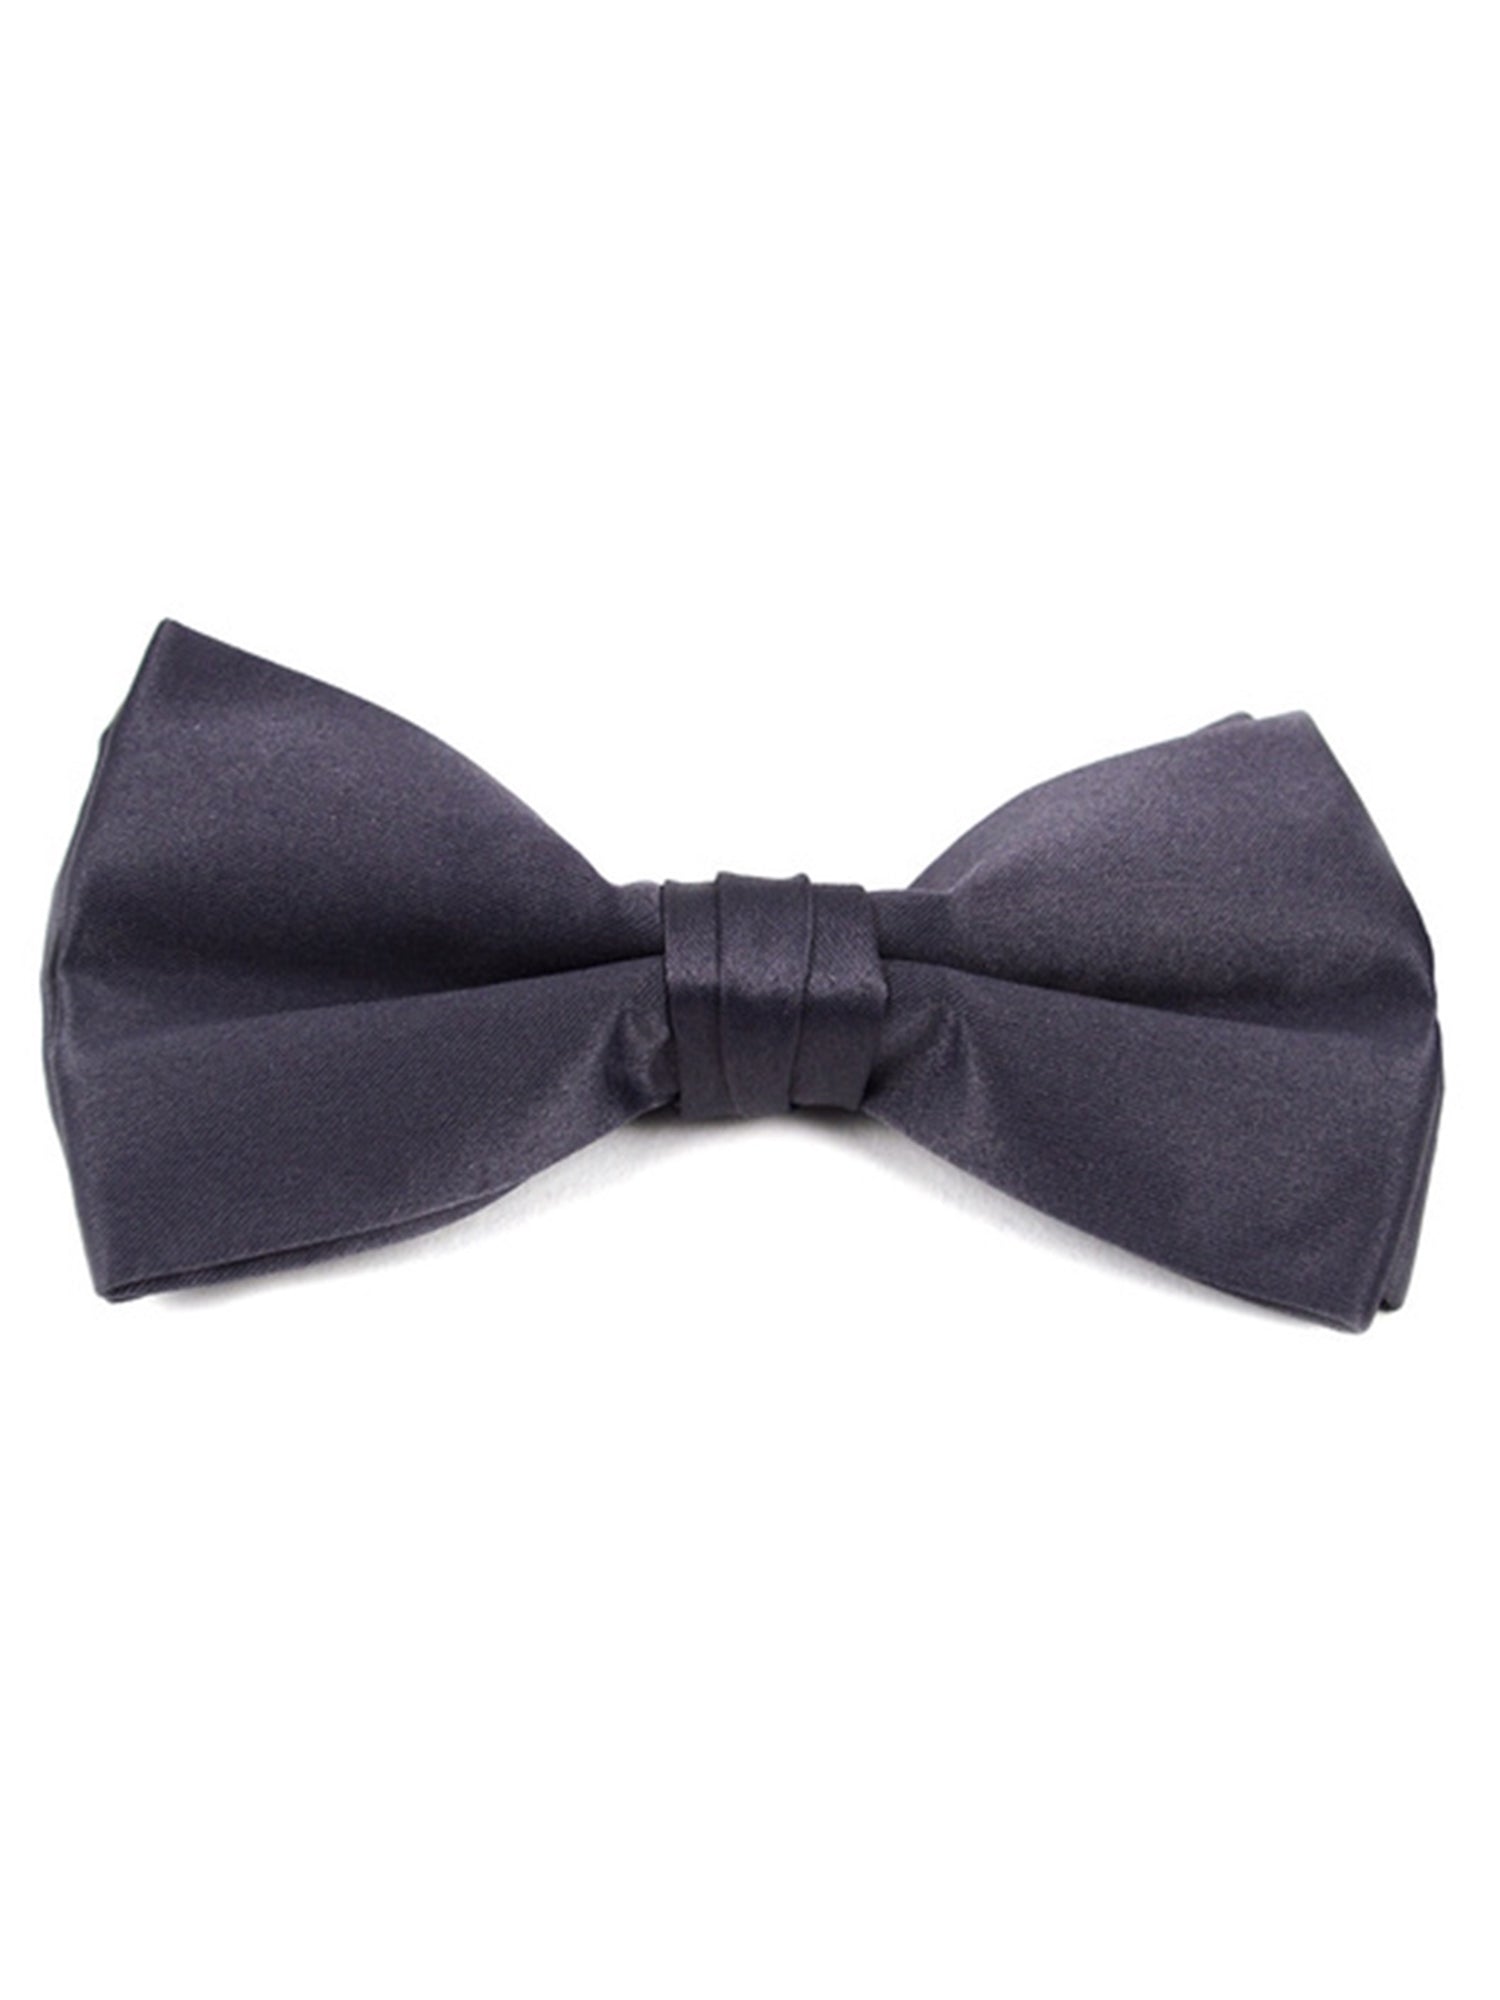 Men's Pre-tied Adjustable Length Bow Tie - Formal Tuxedo Solid Color Men's Solid Color Bow Tie TheDapperTie Charcoal One Size 